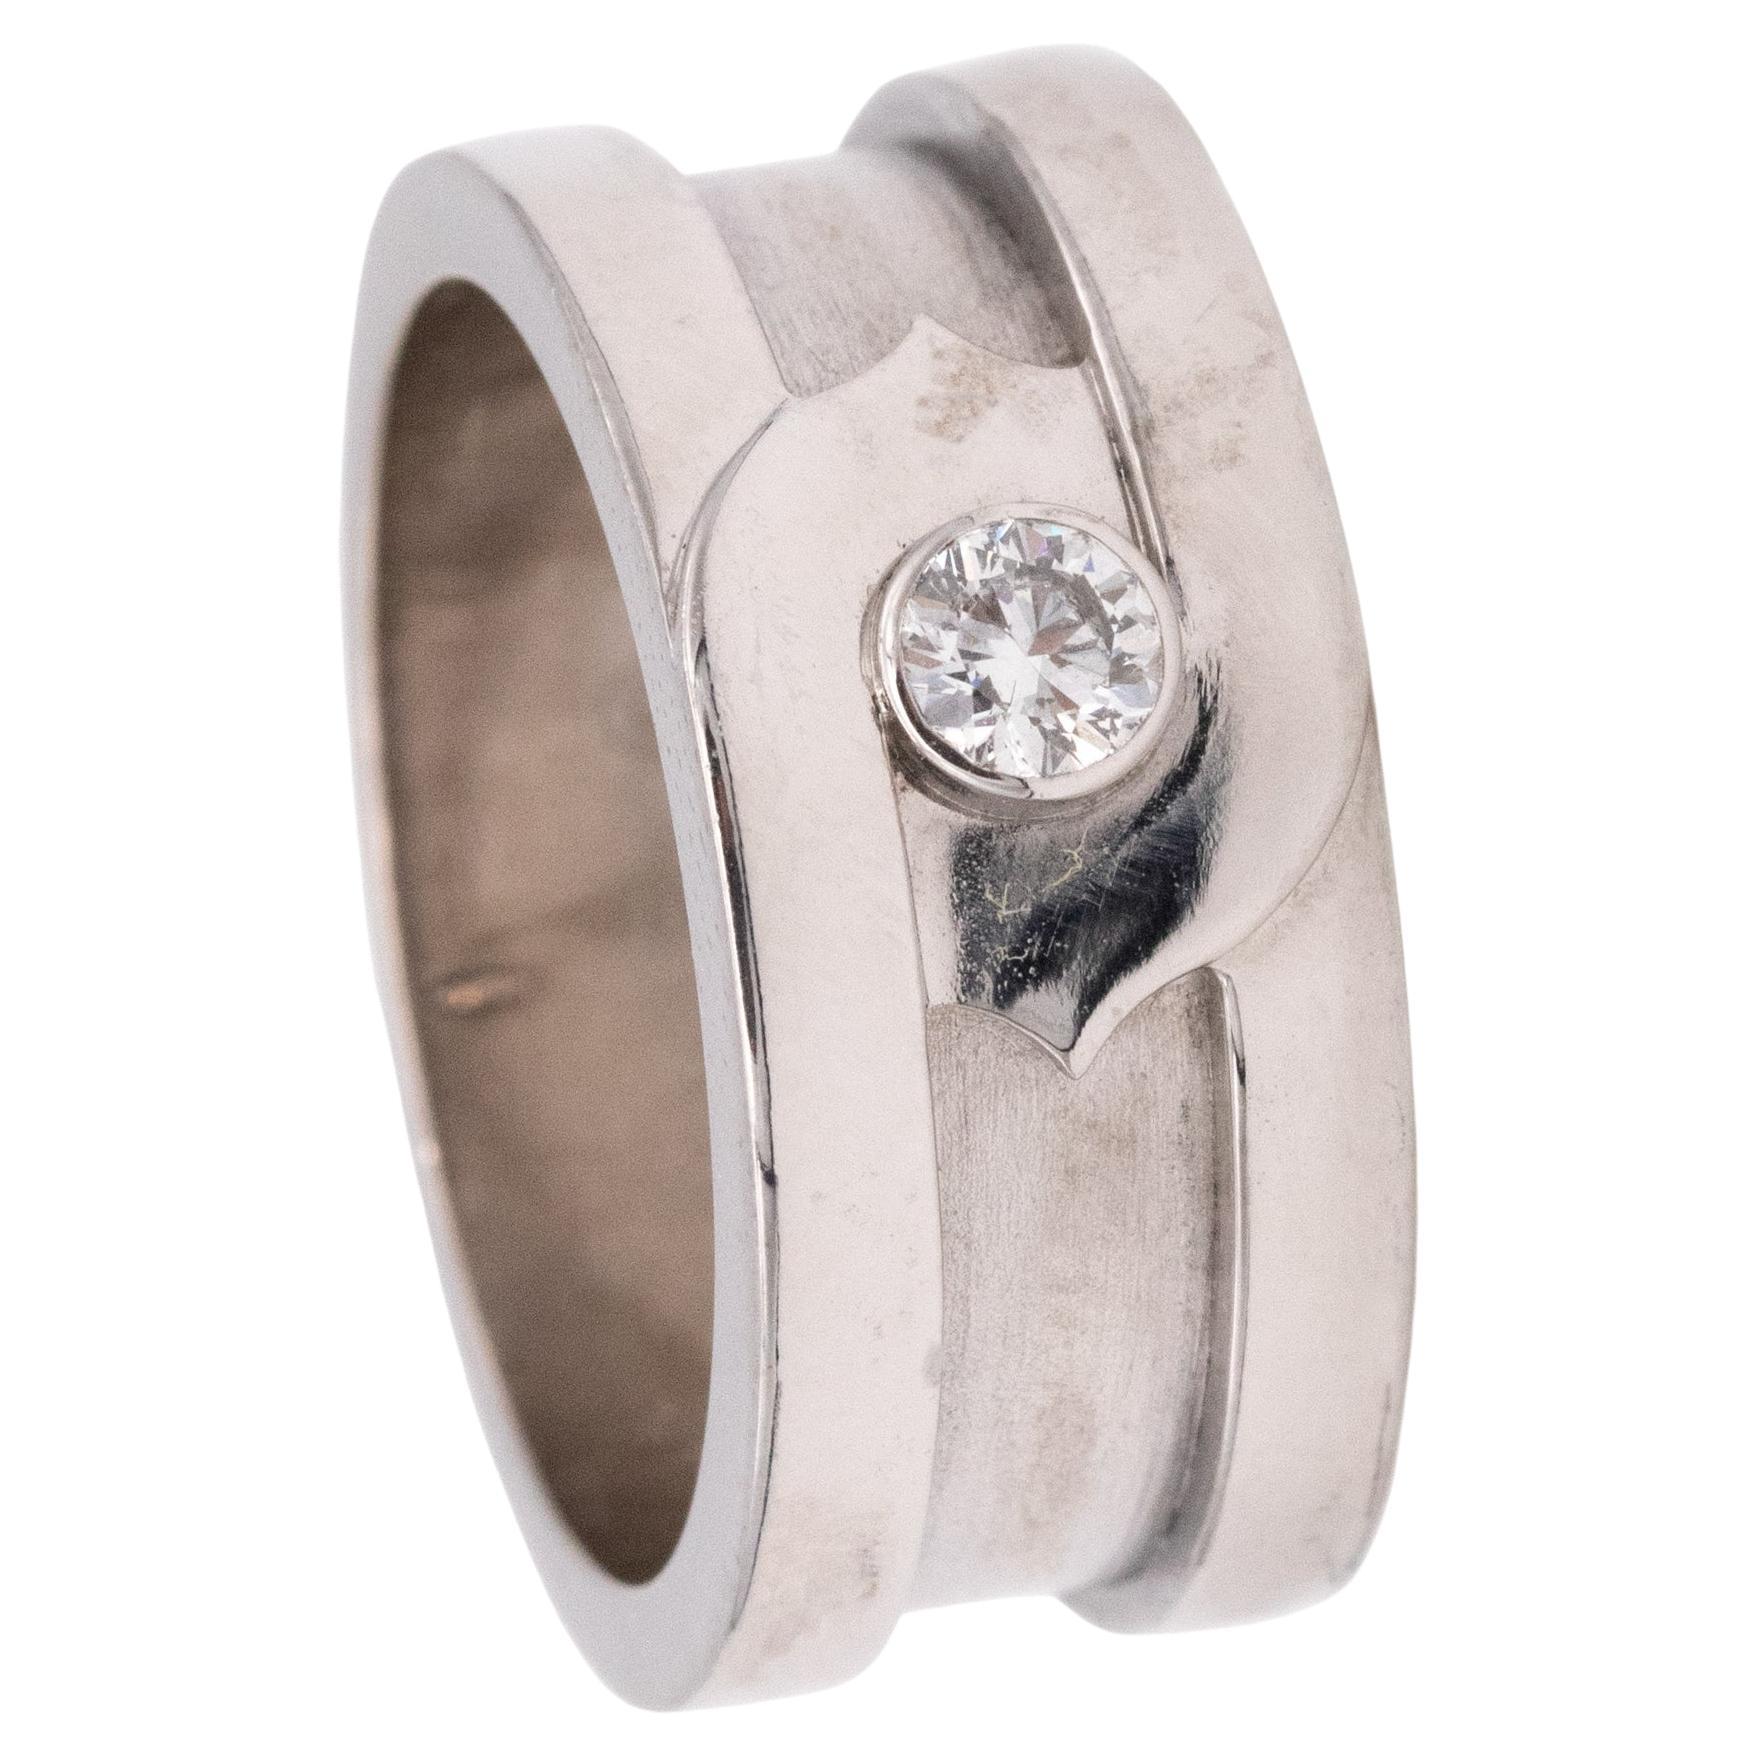 Cartier Paris C 2 Ring in 18Kt White Gold with One VVS Round Diamond